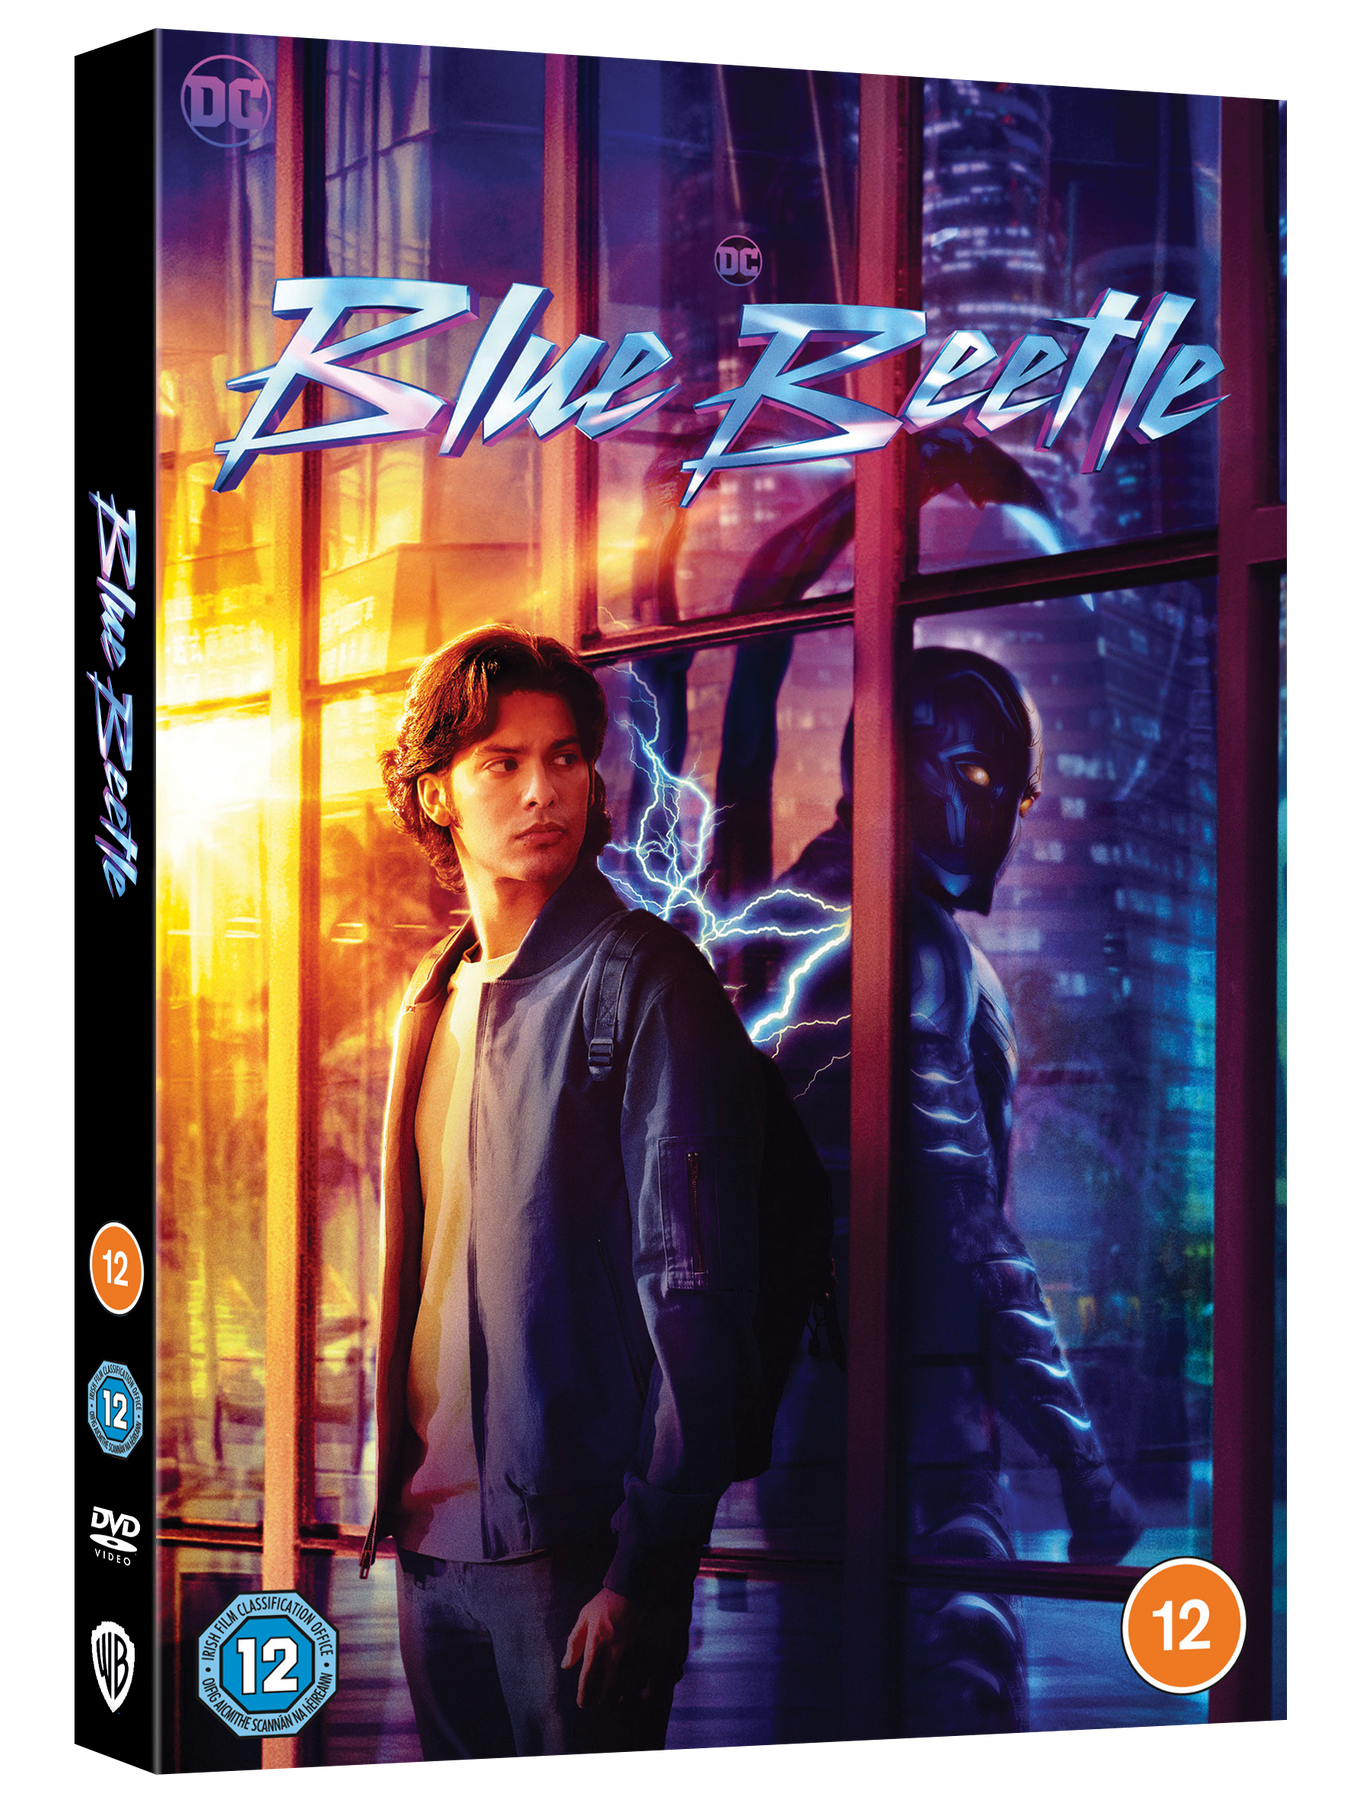 Blue Beetle (2023) R2 UK DVD Cover and Label 